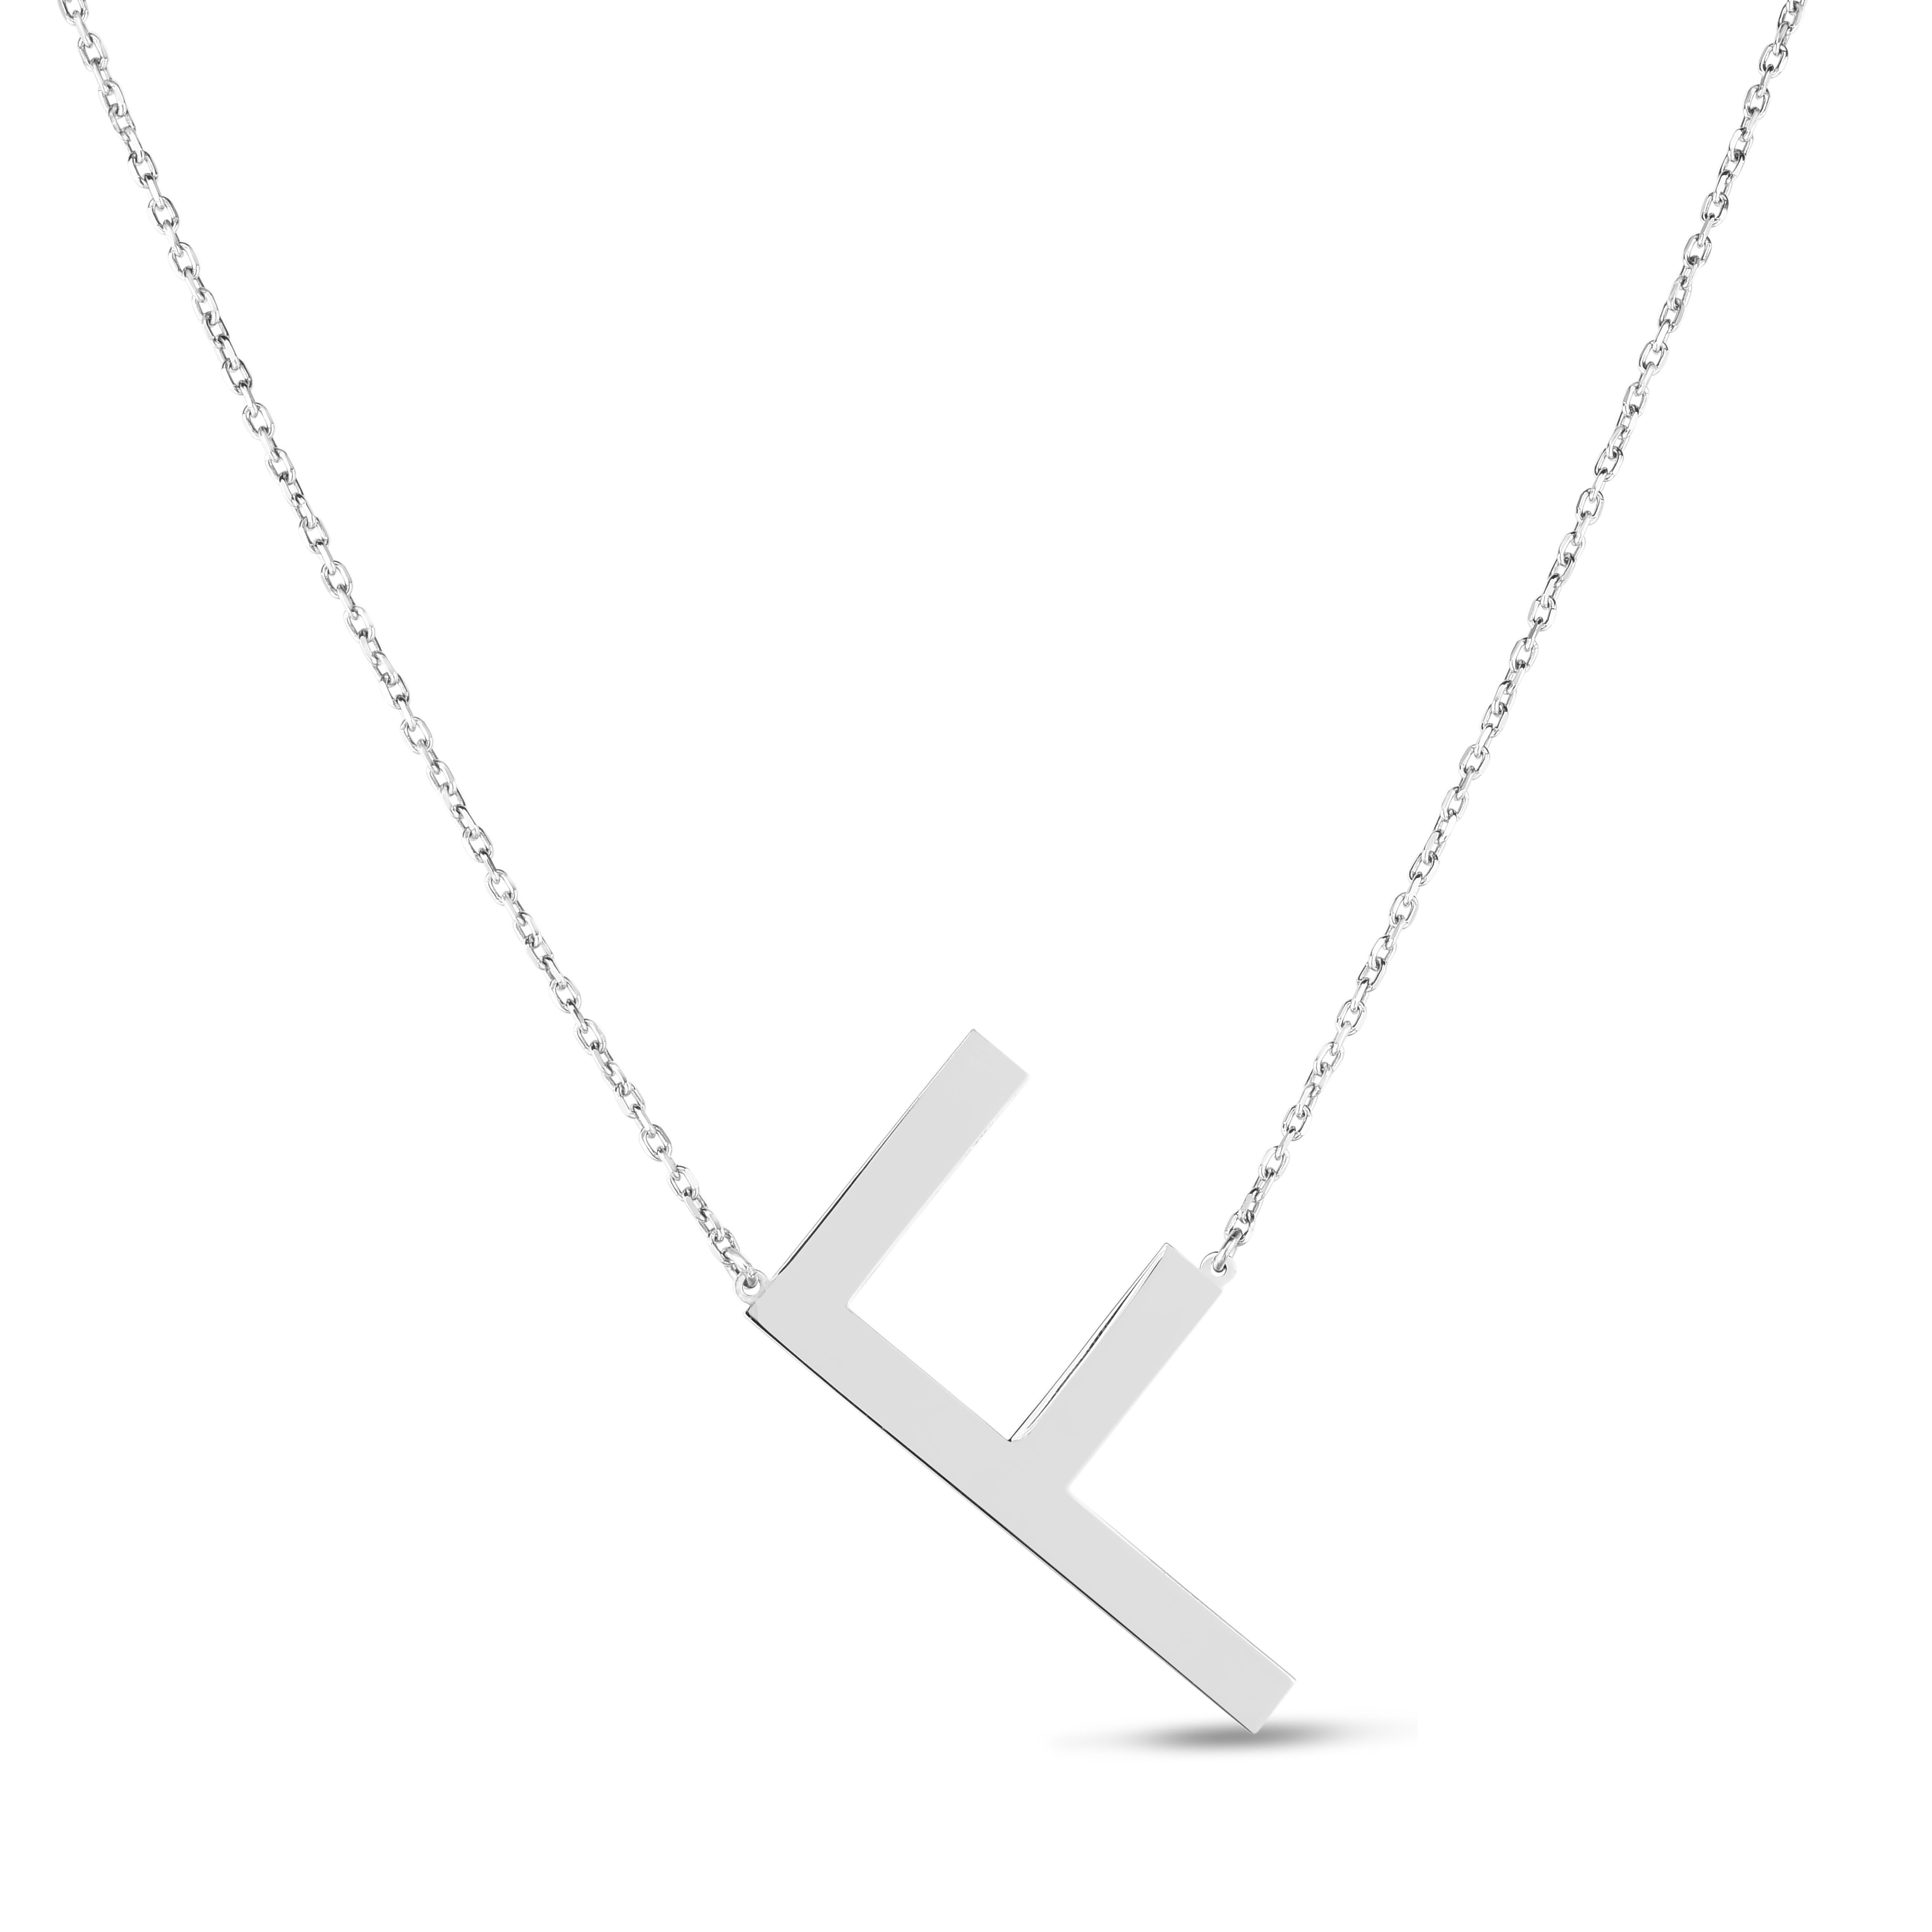 Silver F Letter Necklace